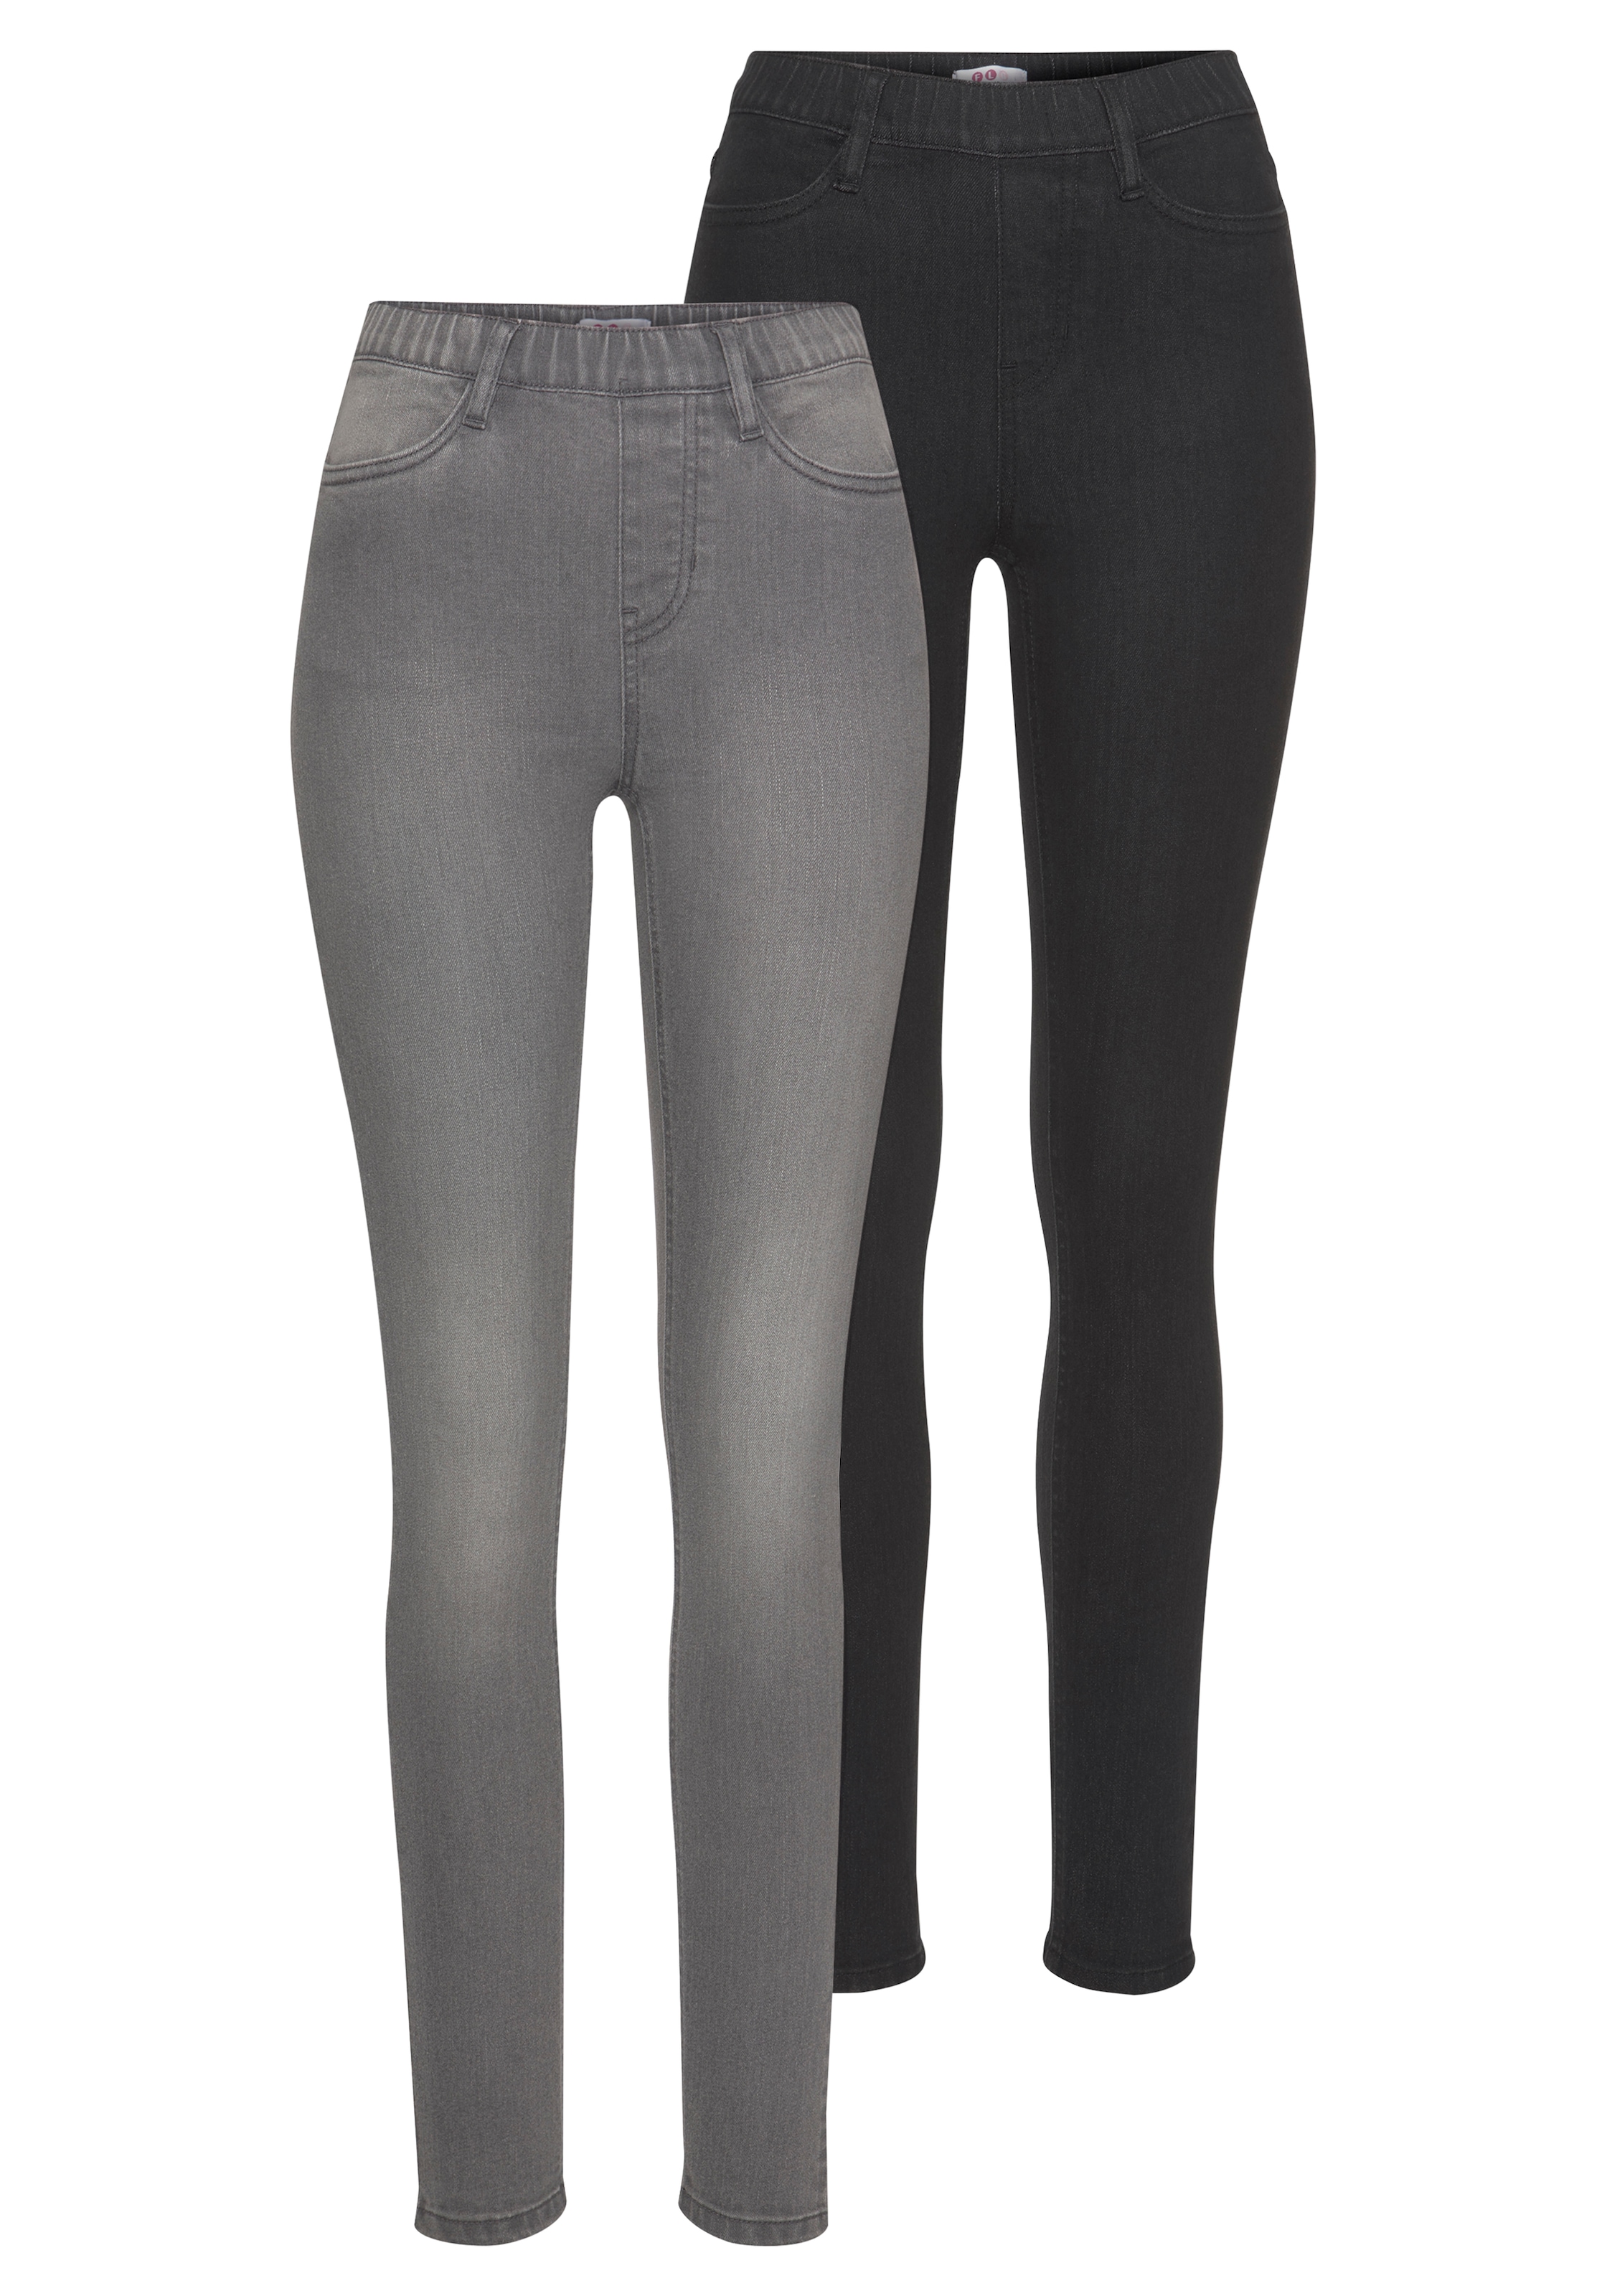 Jeansjeggings, (Packung, 2er-Pack), High Waist